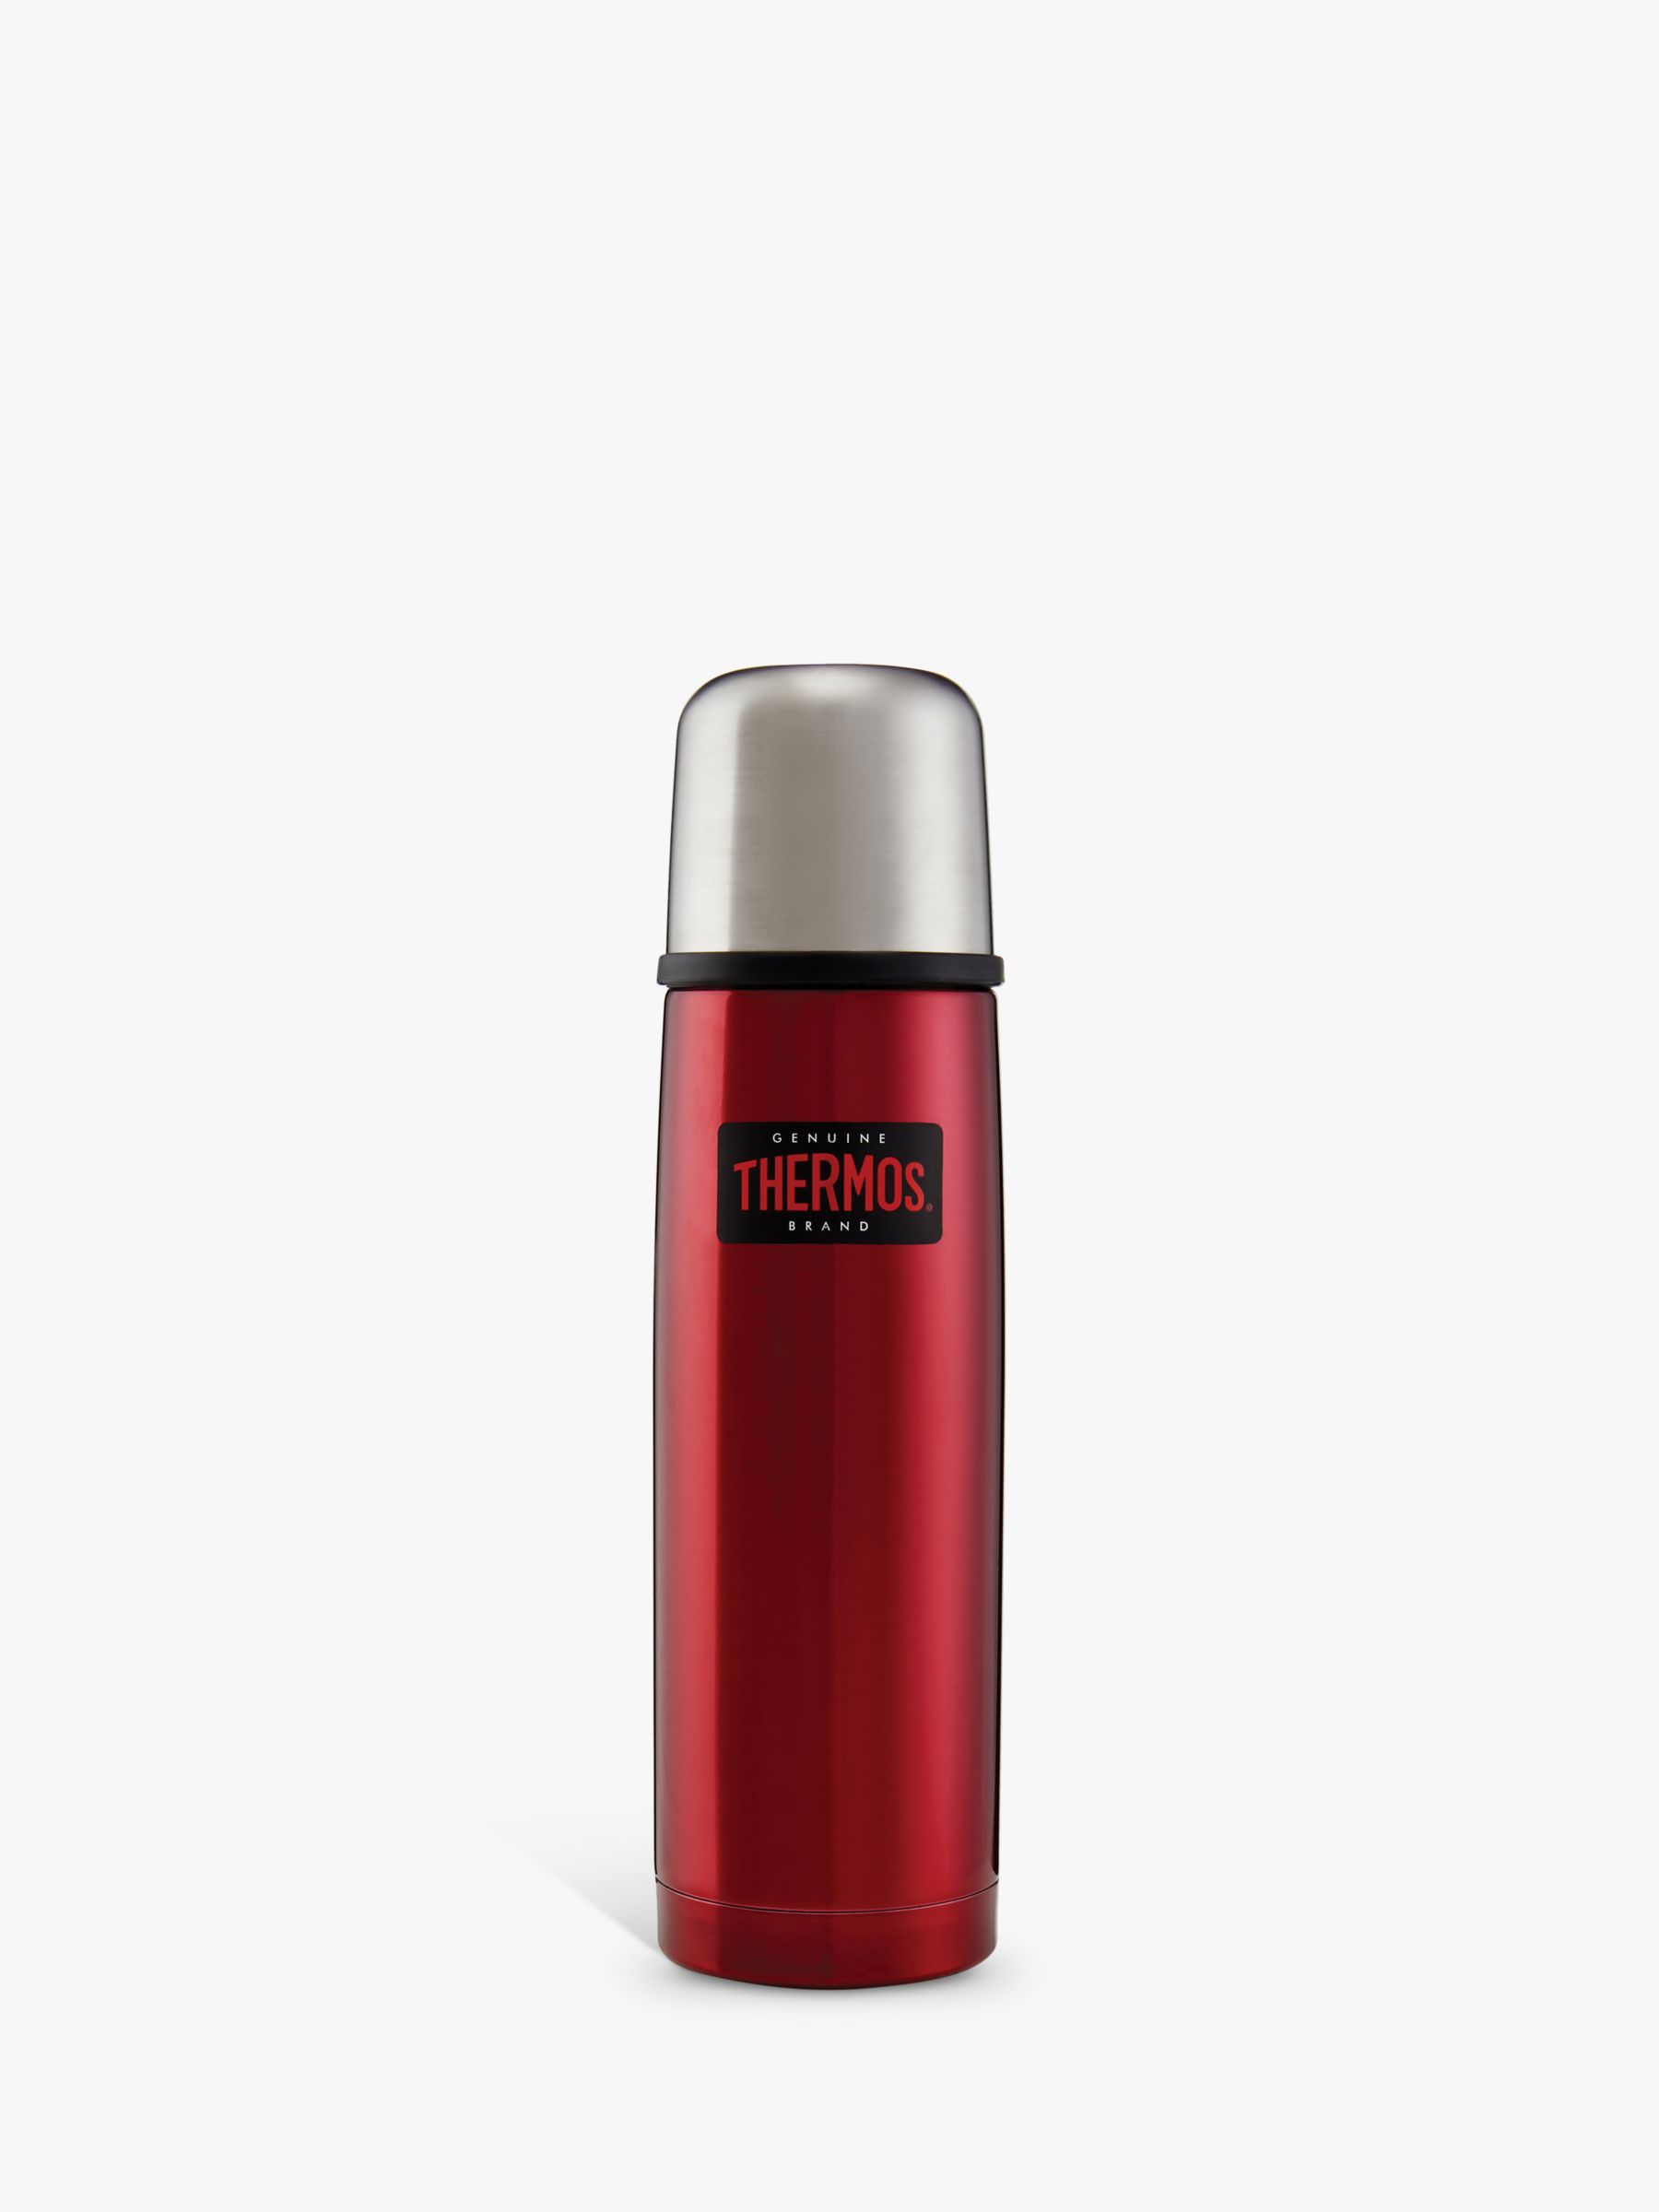 where to buy thermos brand